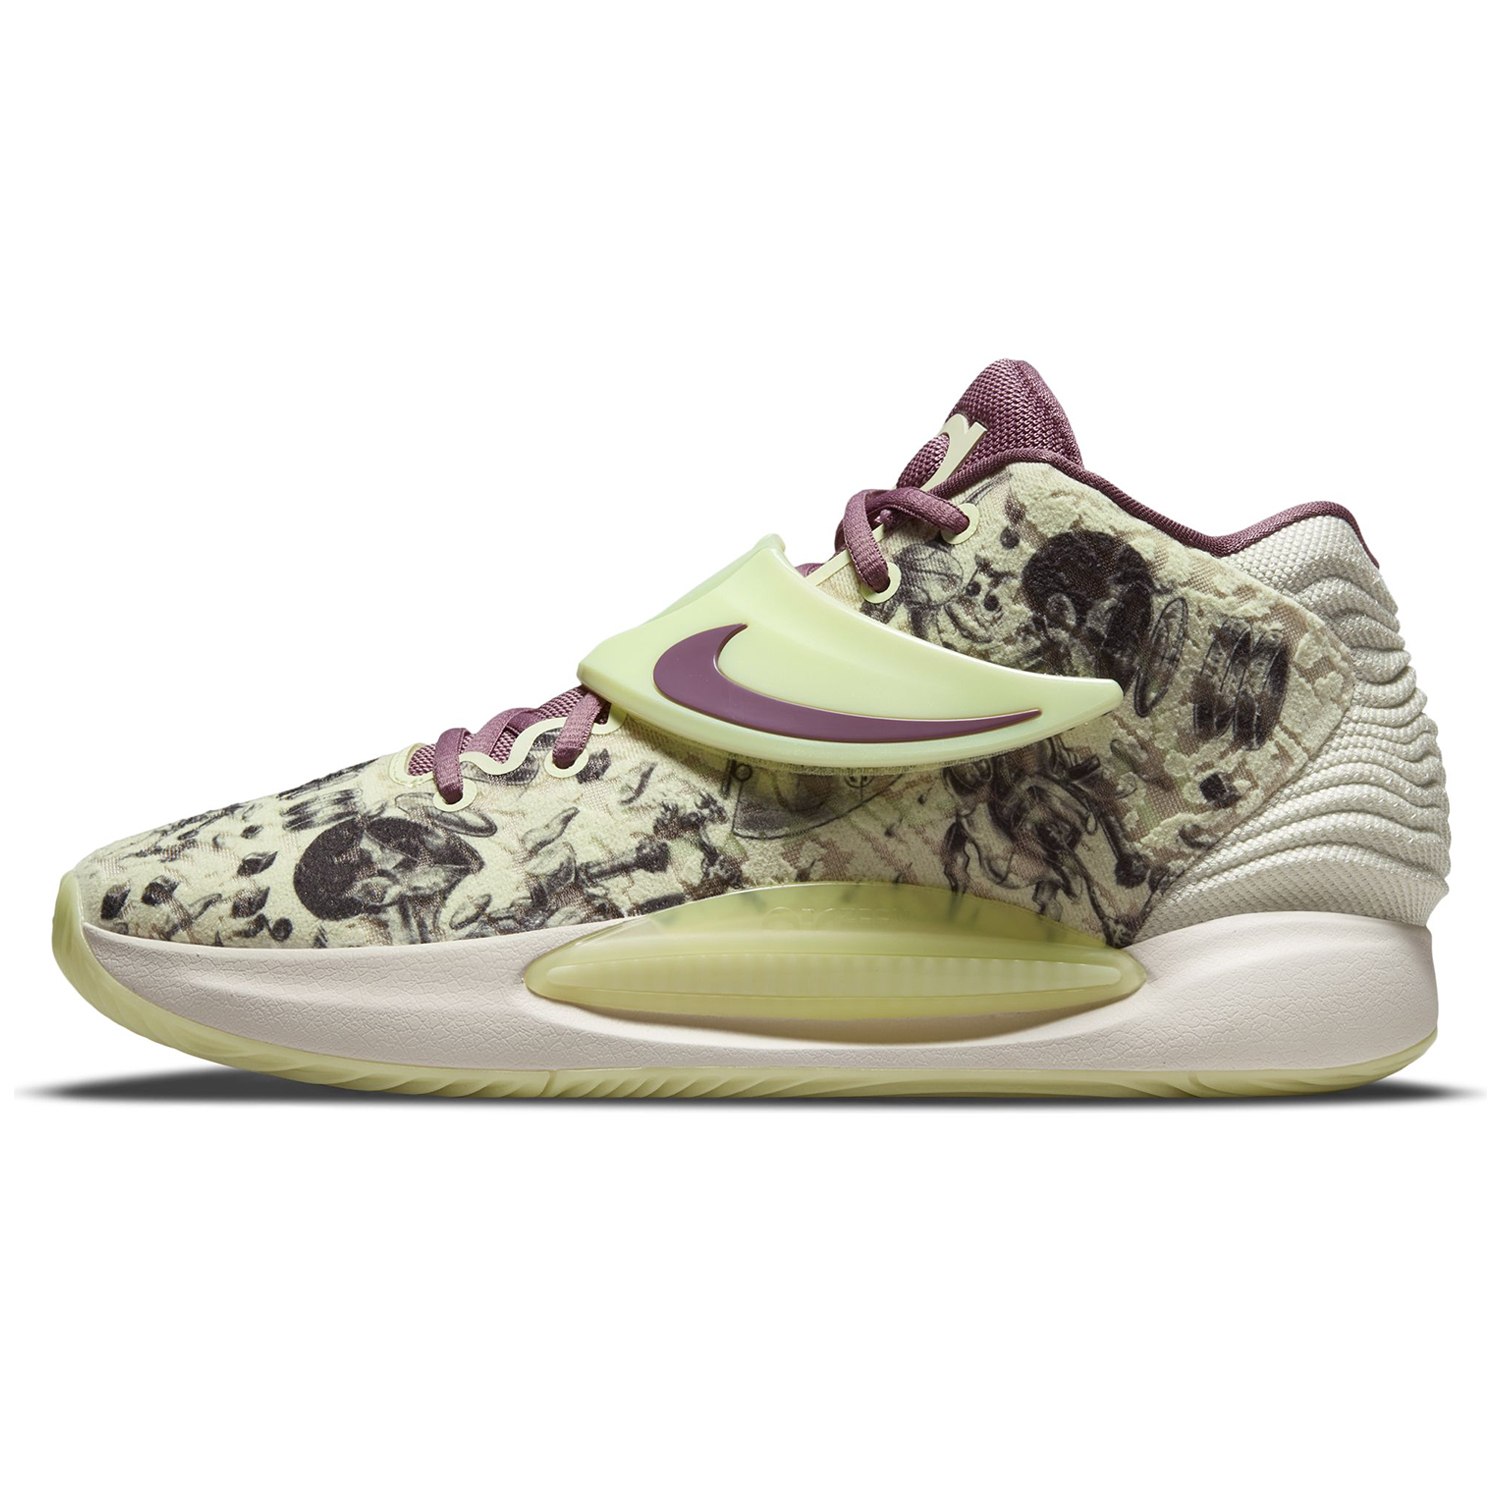 Nike KD14 Ανδρικά Παπούτσια για Μπάσκετ CW3935-300 LIME ICE/LIGHT MULBERRY-PEARL WHITE